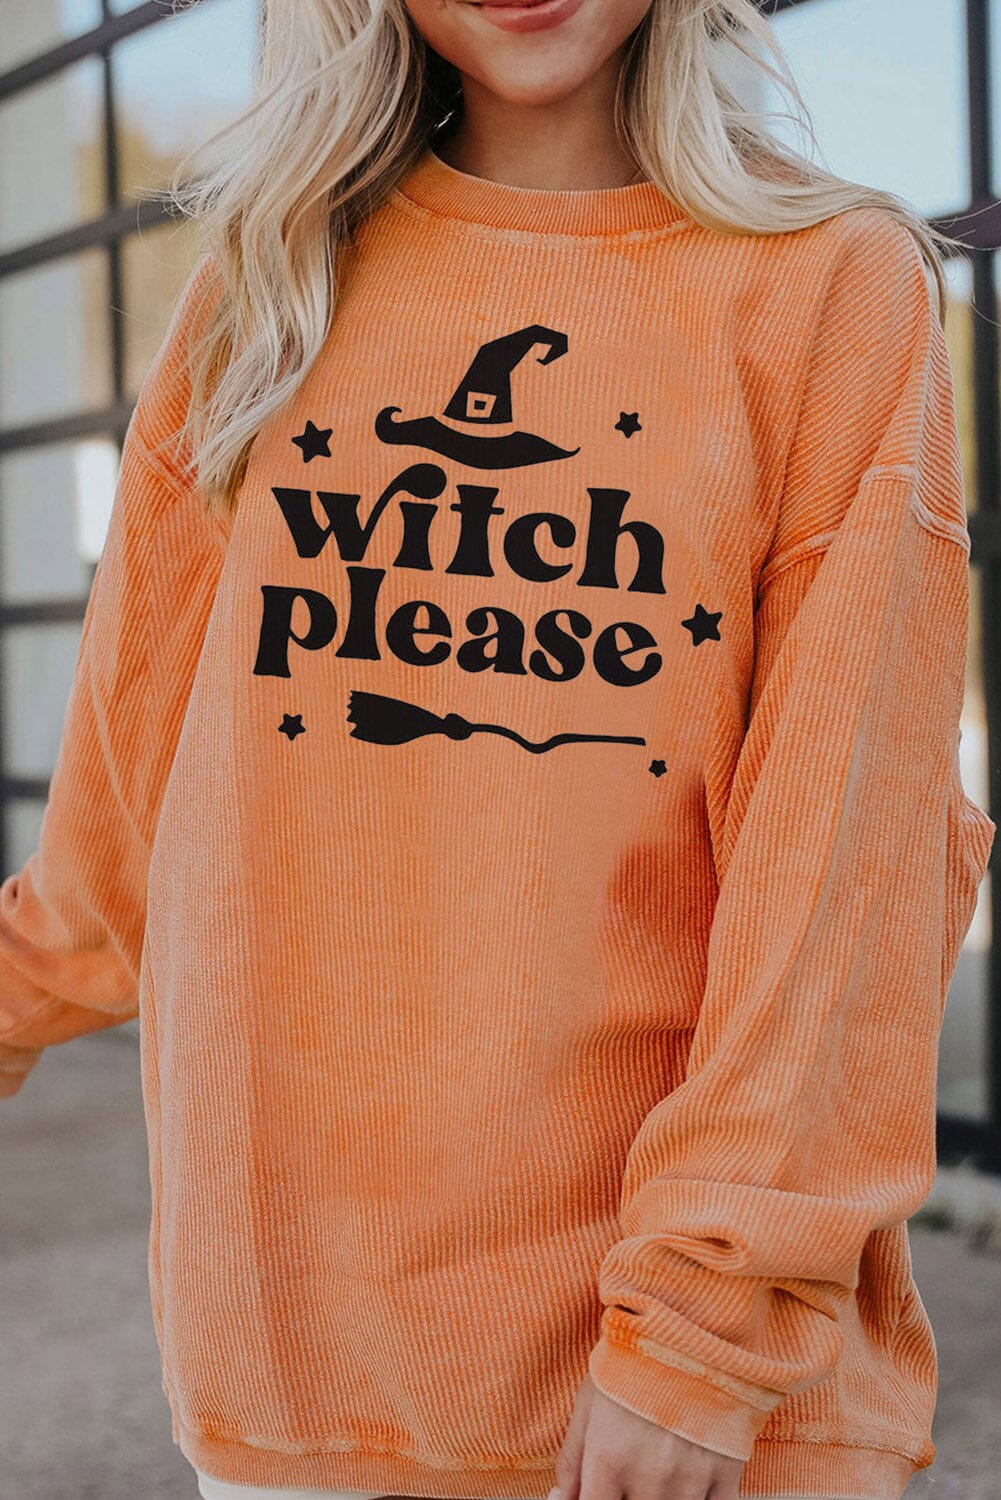 WITCH PLEASE Graphic Dropped Shoulder Sweatshirt - Sydney So Sweet